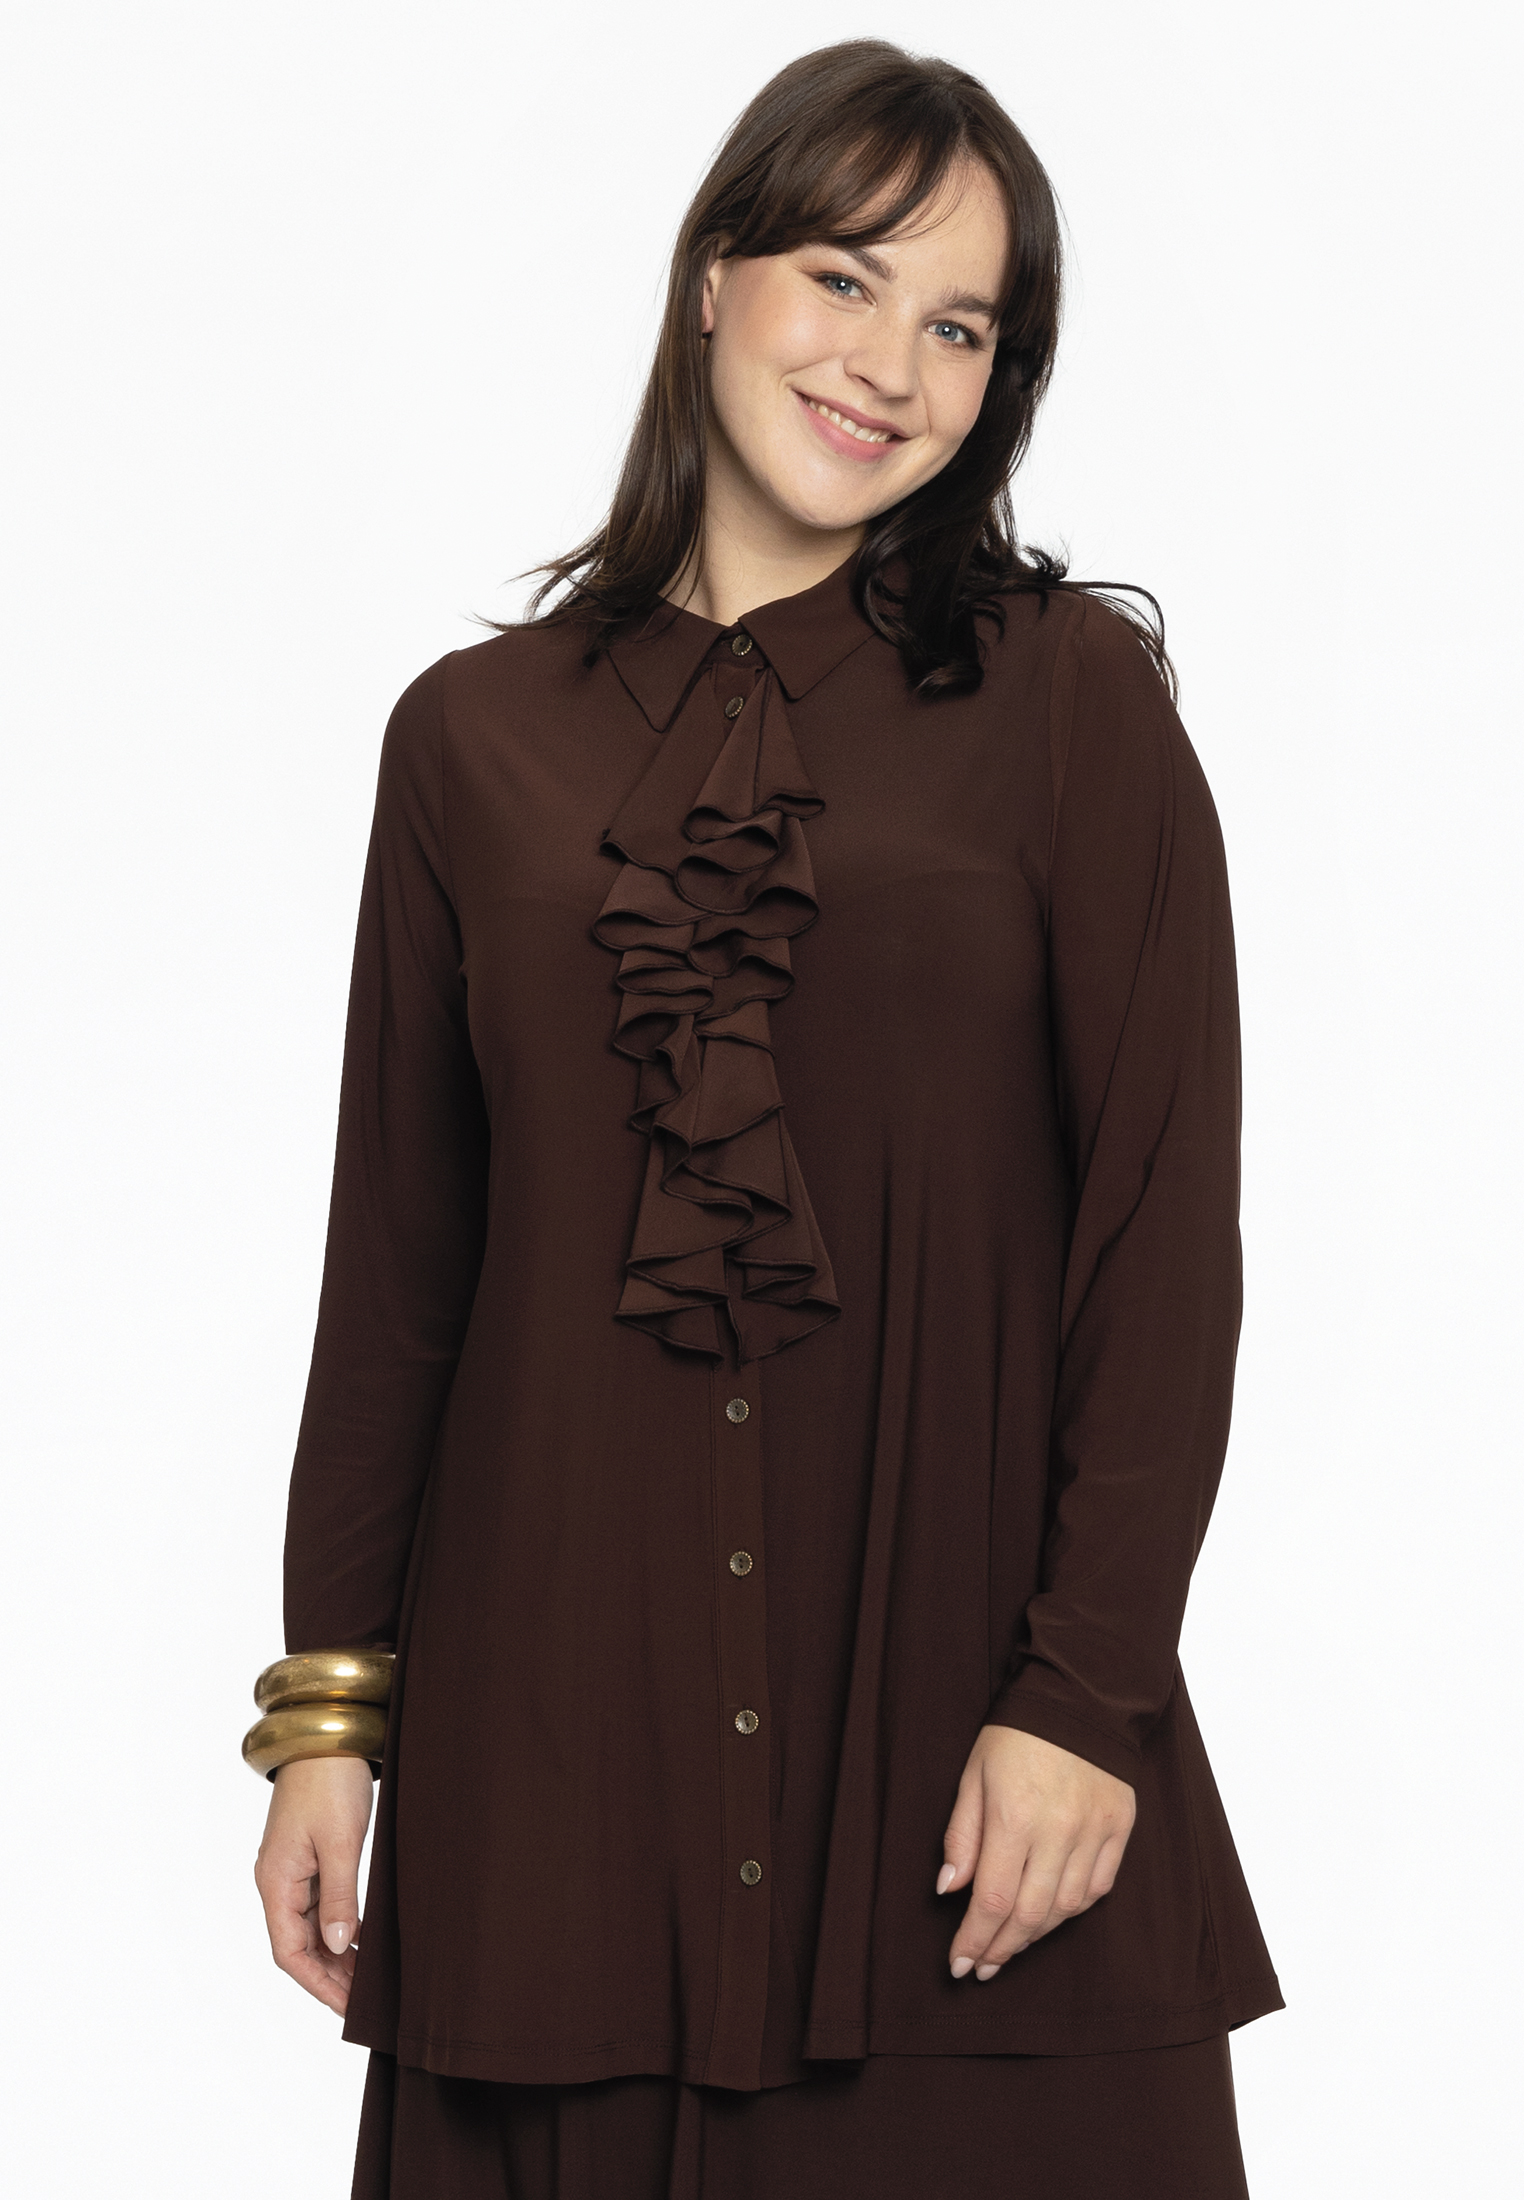 Blouse met volants DOLCE 46/48 brown